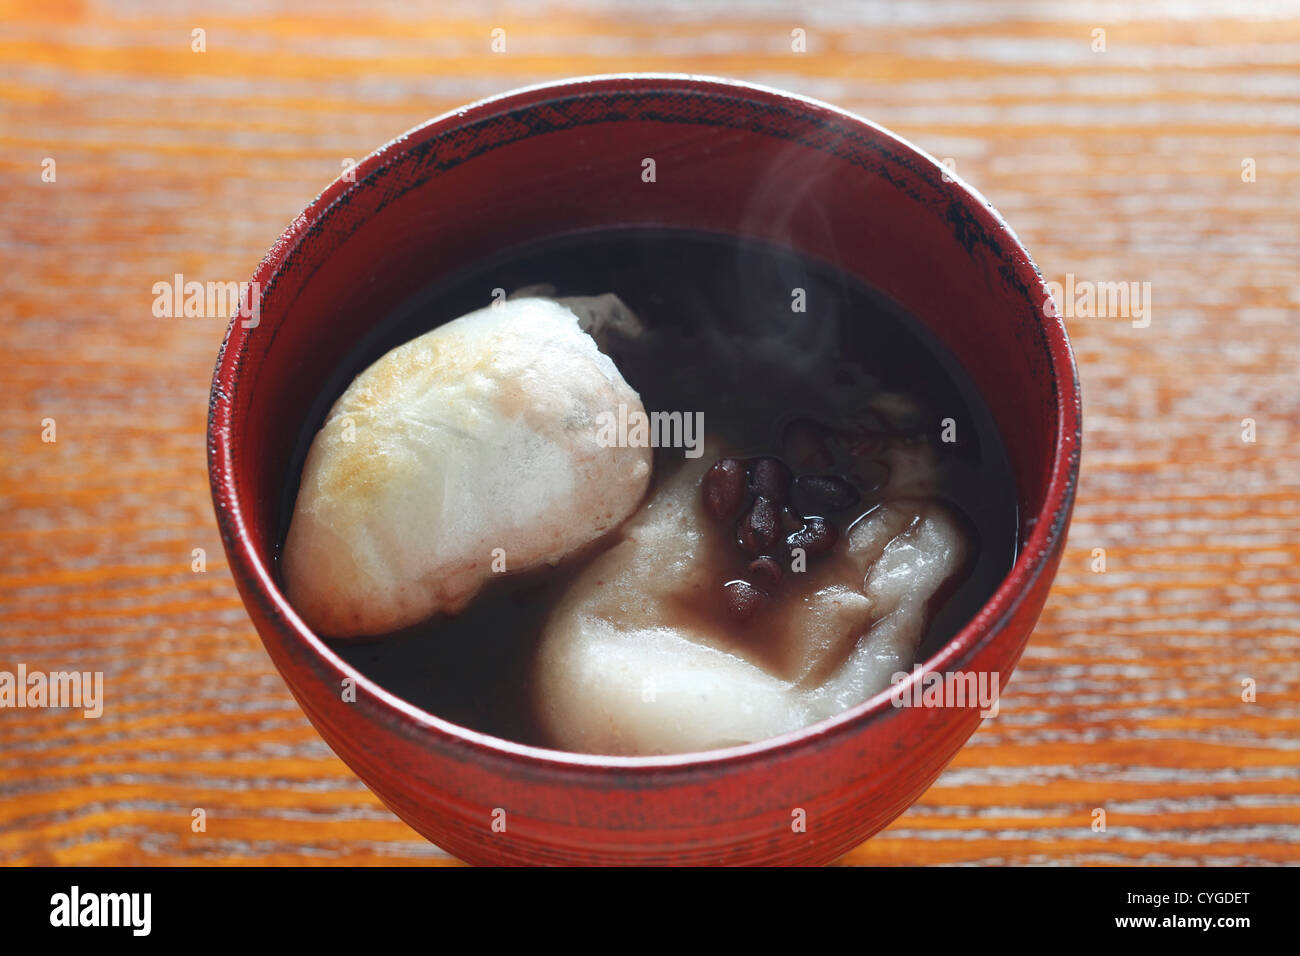 Japanese style steamed rice cake Stock Photo